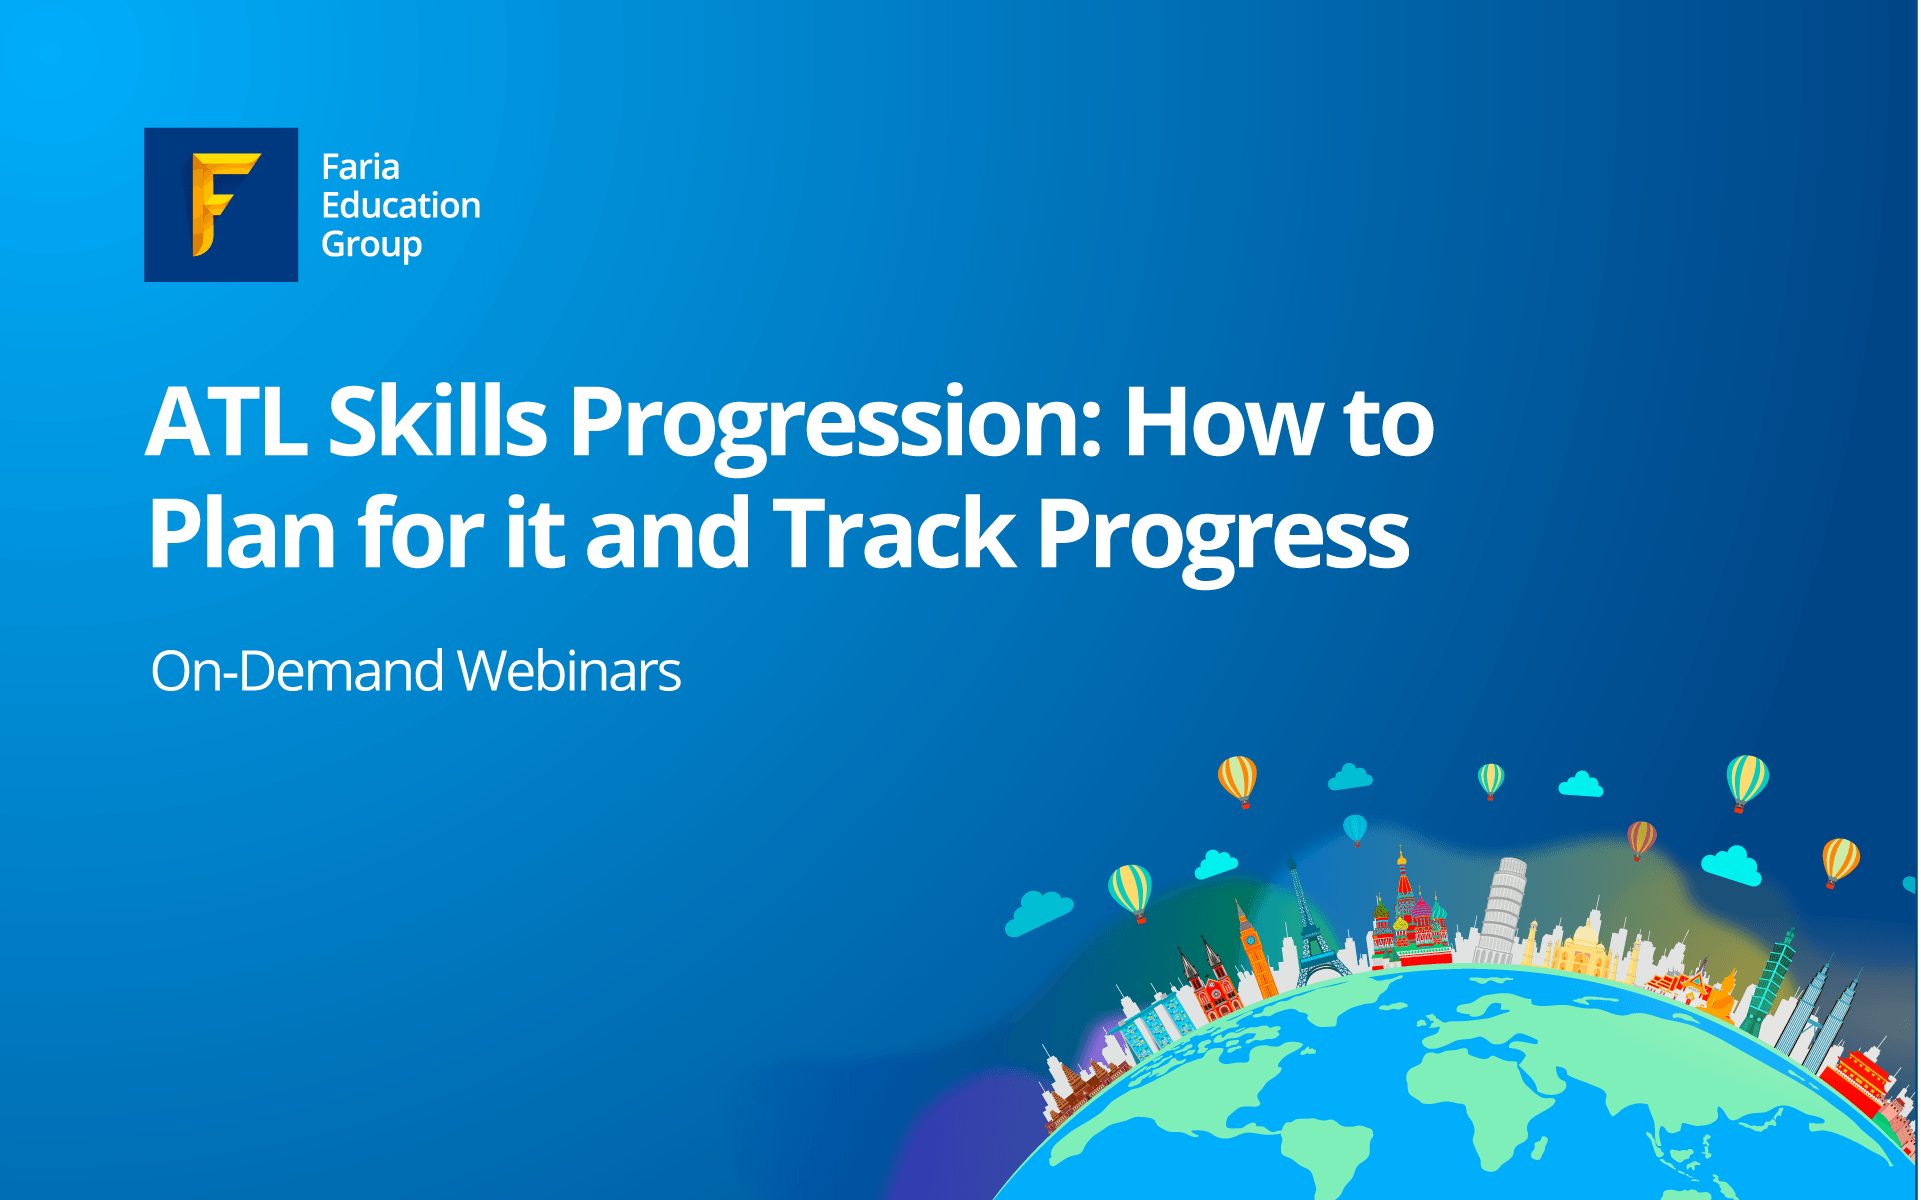 ATL Skills Progression: How to Plan for it and Track Progress